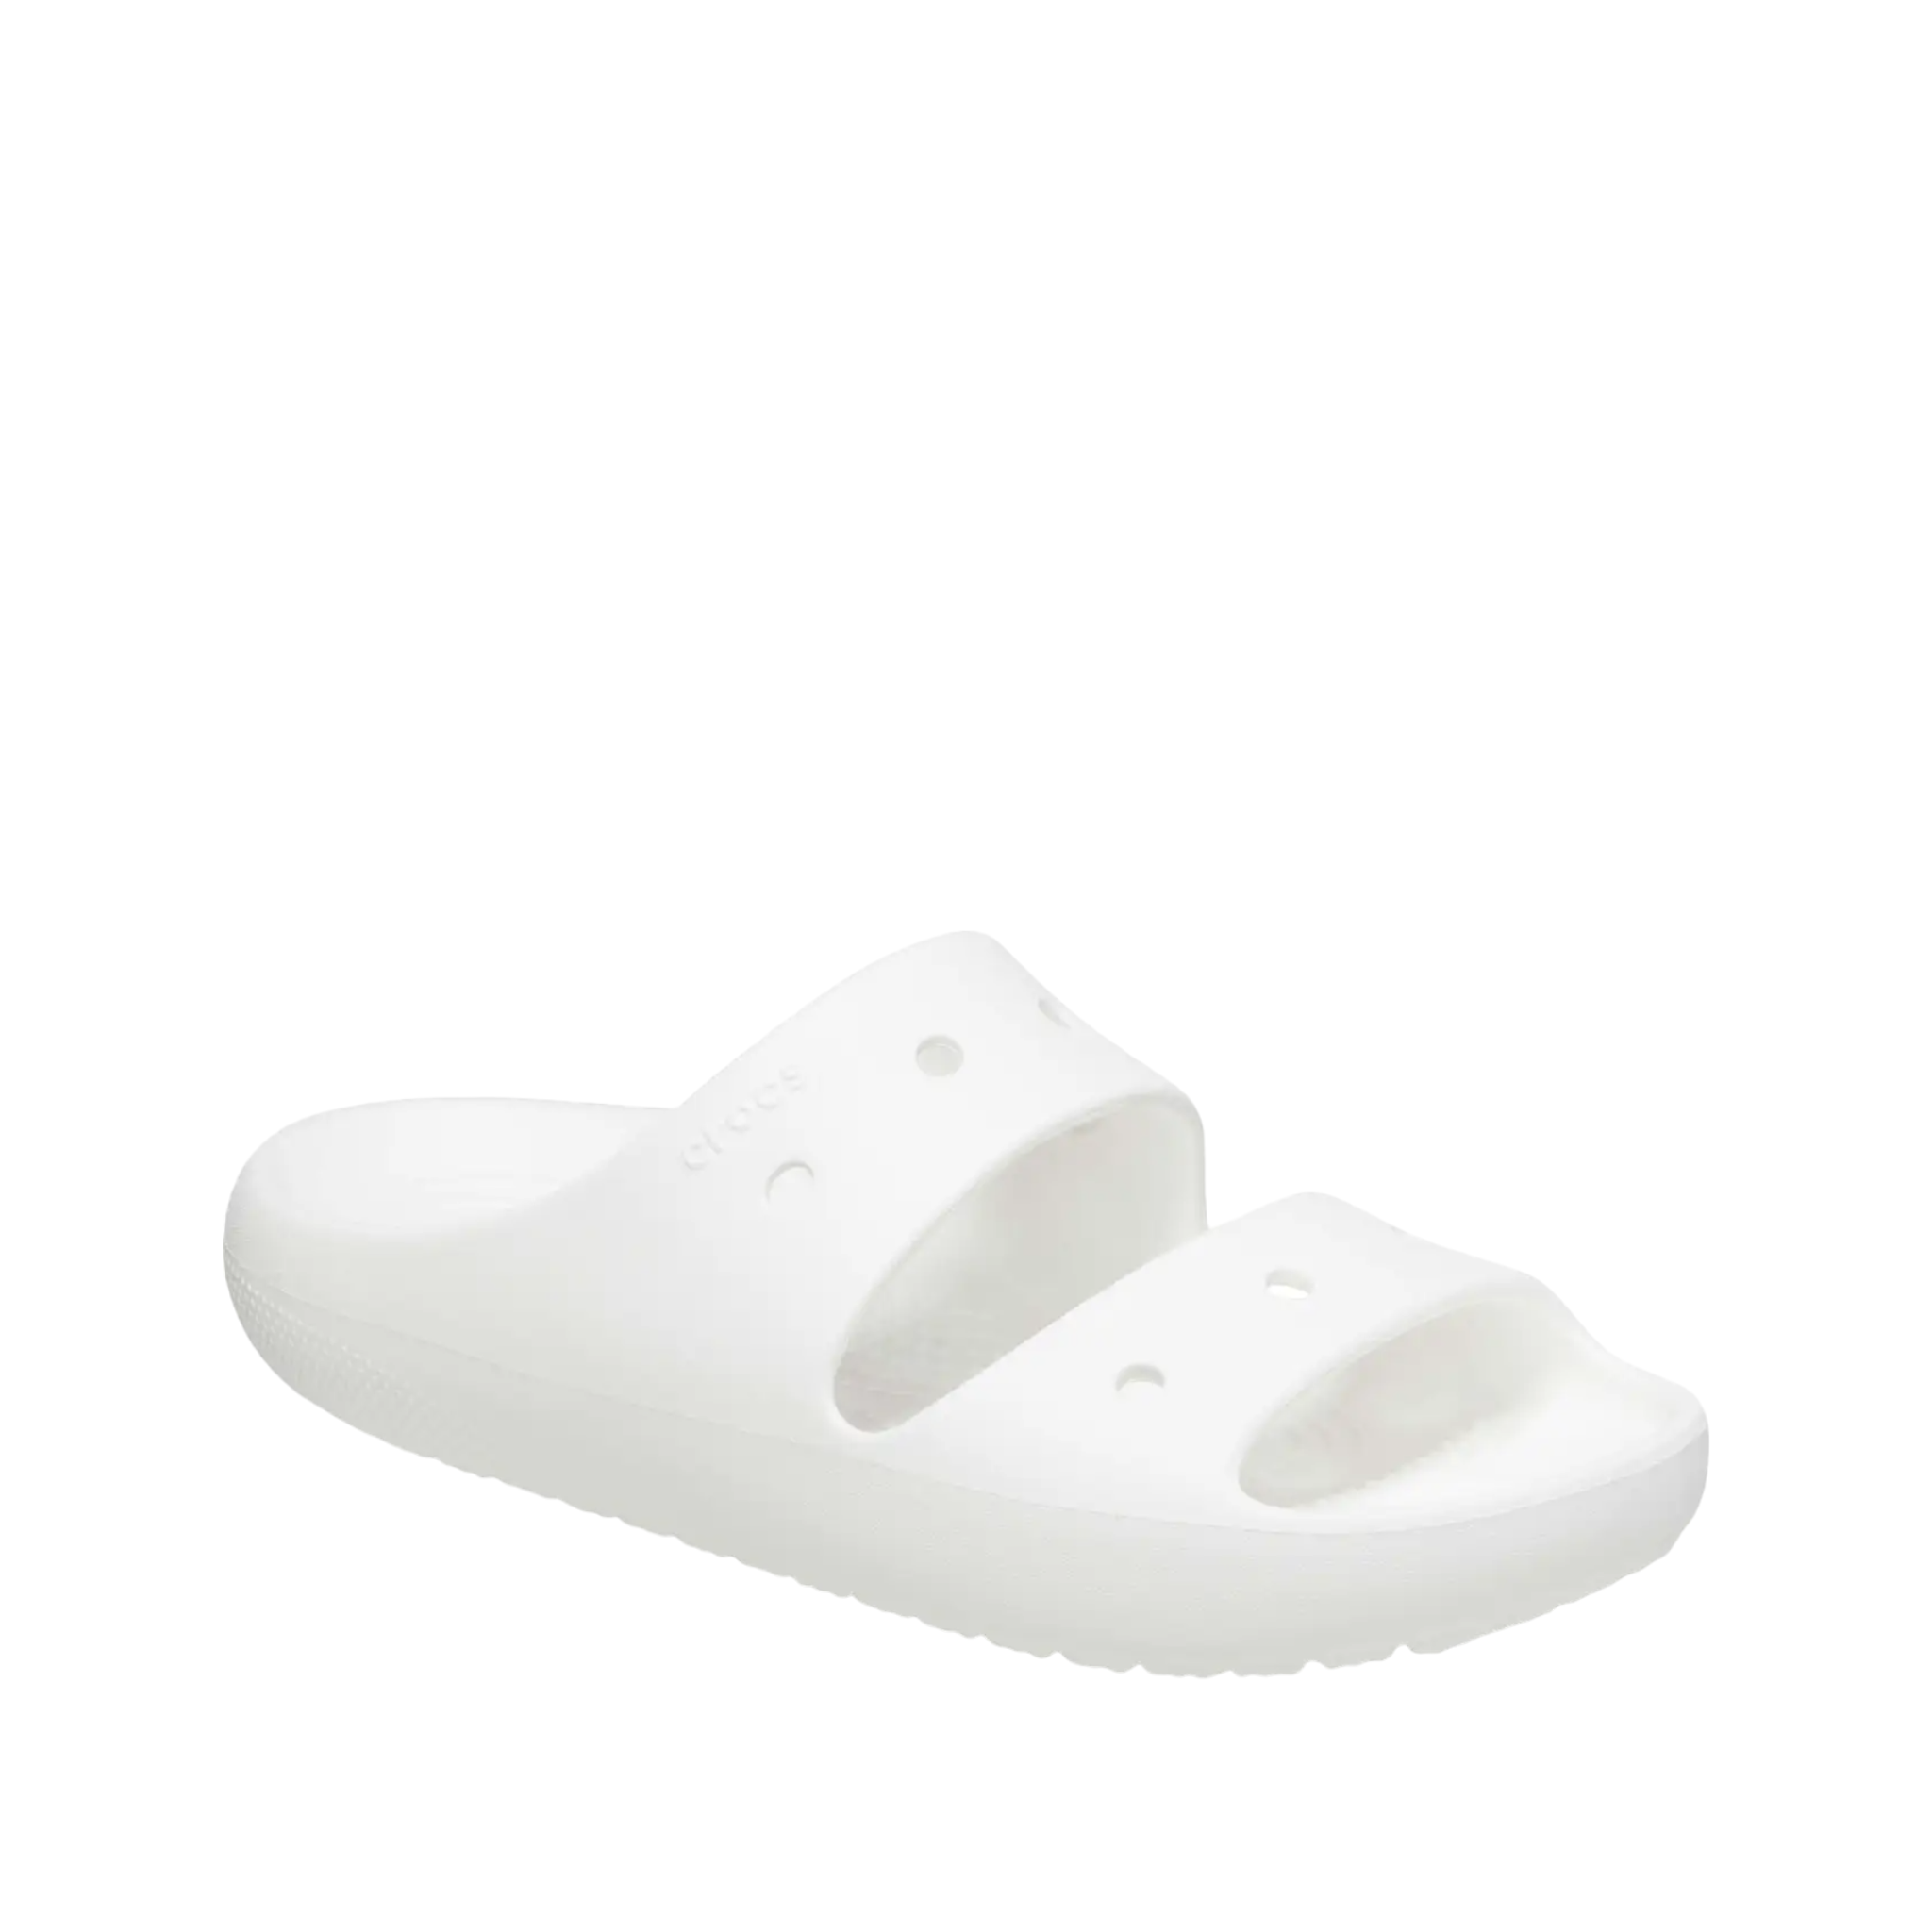 Shop Classic Sandal V2 - with shoe&me - from Crocs - Sandals - Mens, Sandals, Summer, Womens - [collection]